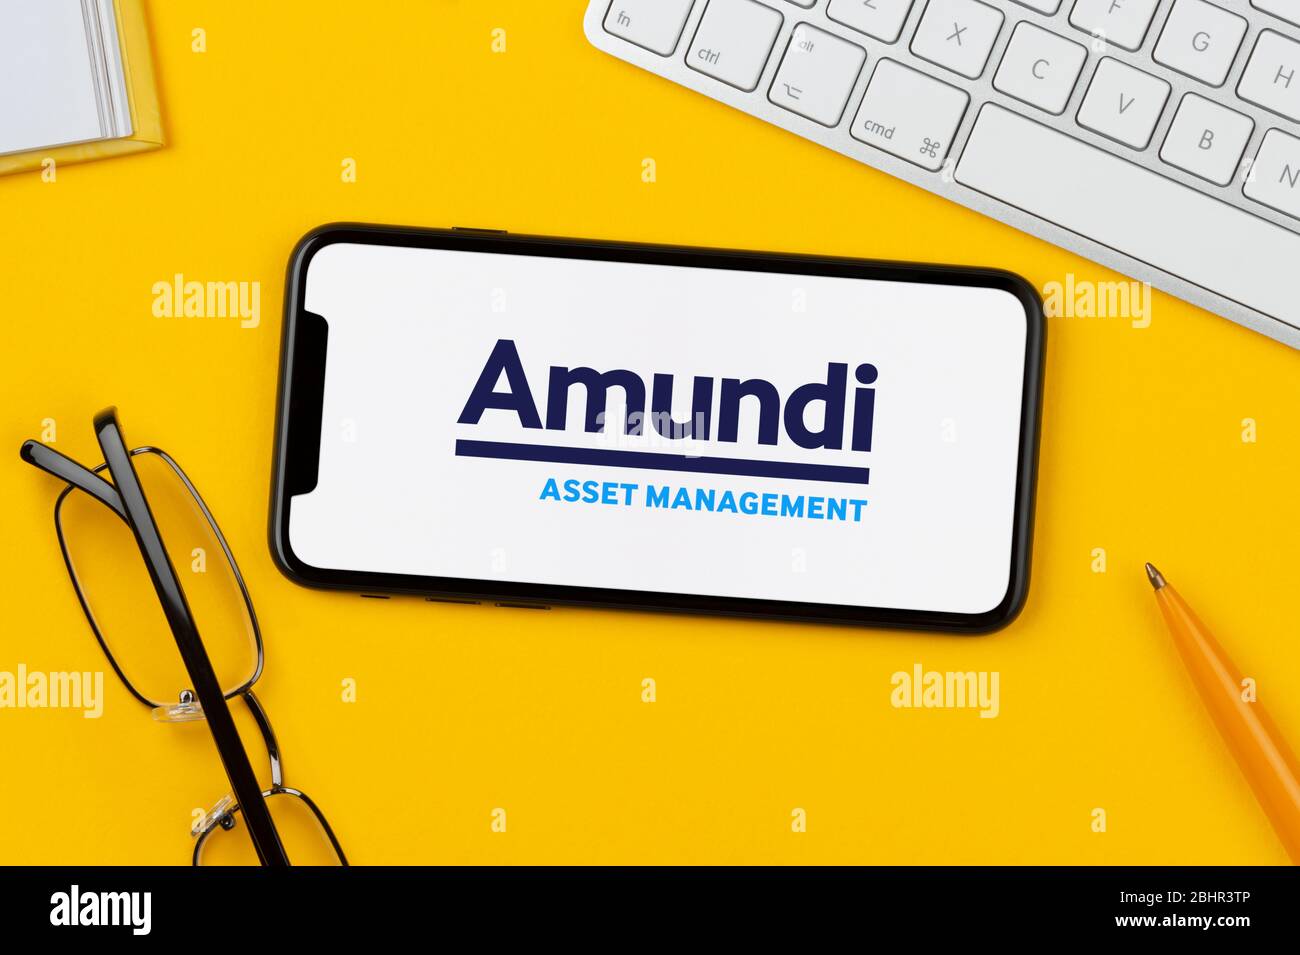 A smartphone showing the Amundi Asset Management logo rests on a yellow background along with a keyboard, glasses, pen and book (Editorial use only). Stock Photo